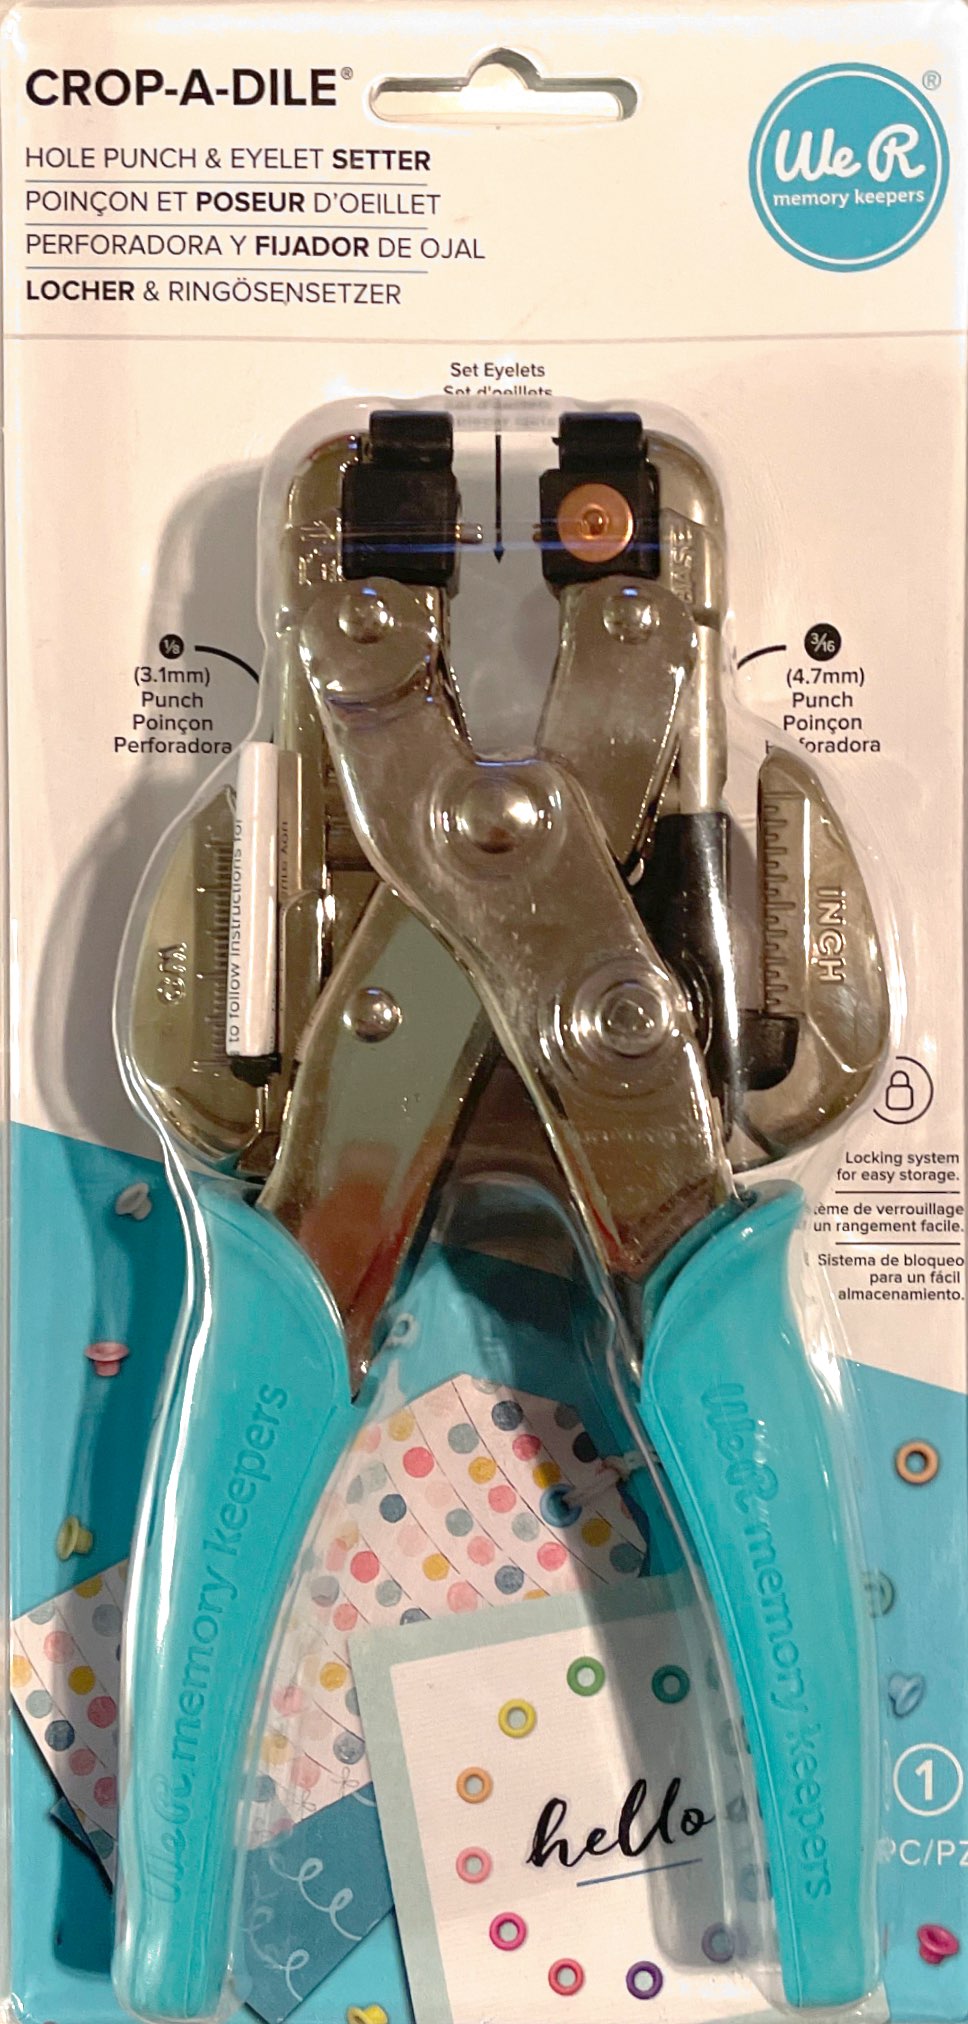 Crop-A-Dile Hole Punch & Eyelet Setter